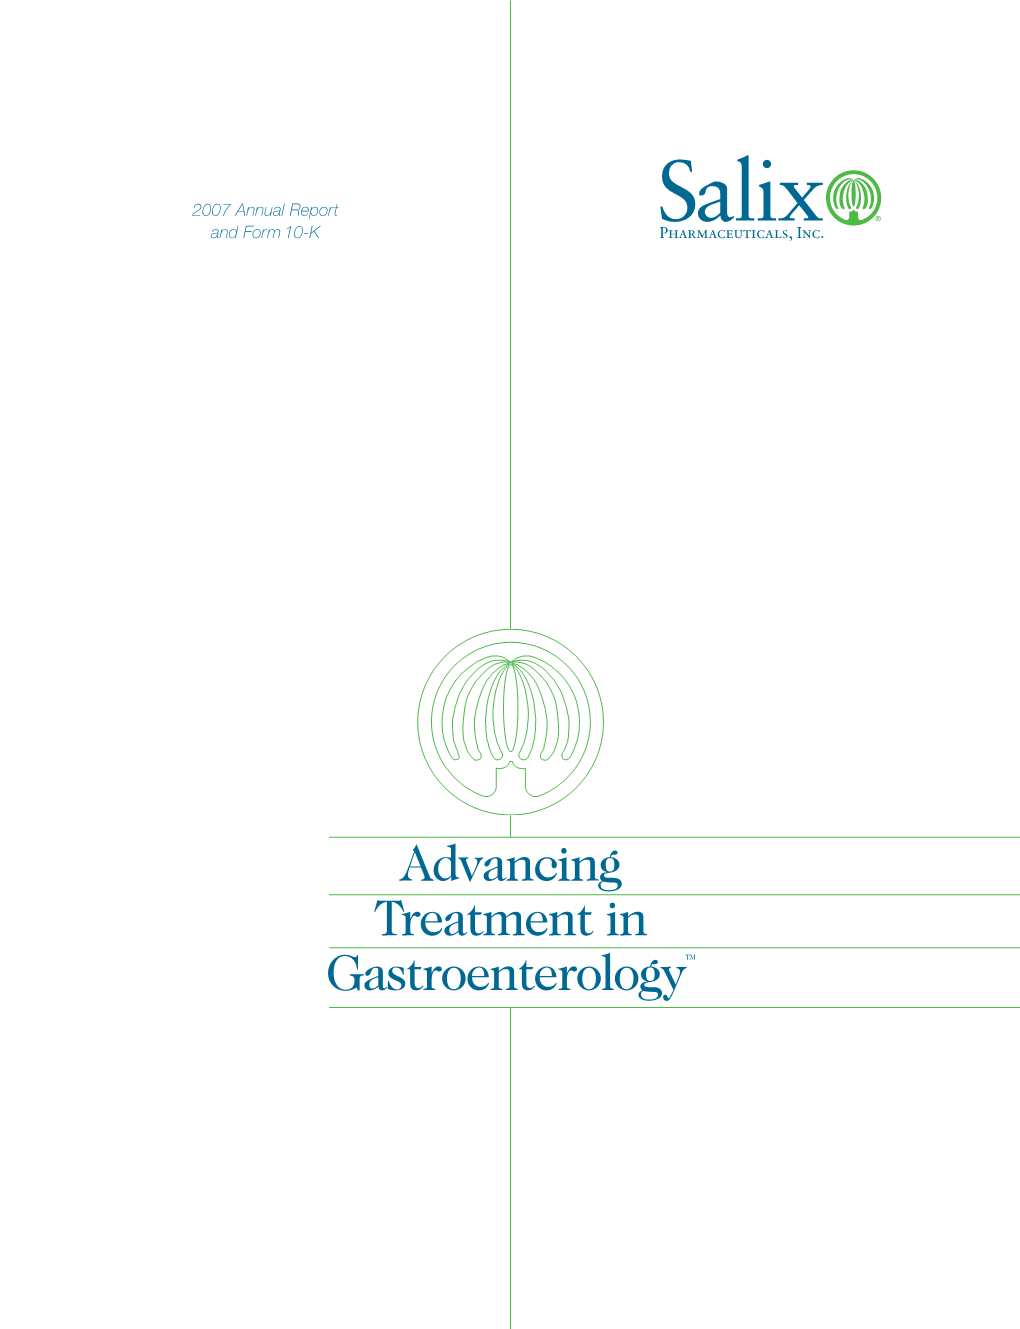 Salix Pharmaceuticals, Inc. 2007 Annual Report and Form 10-K